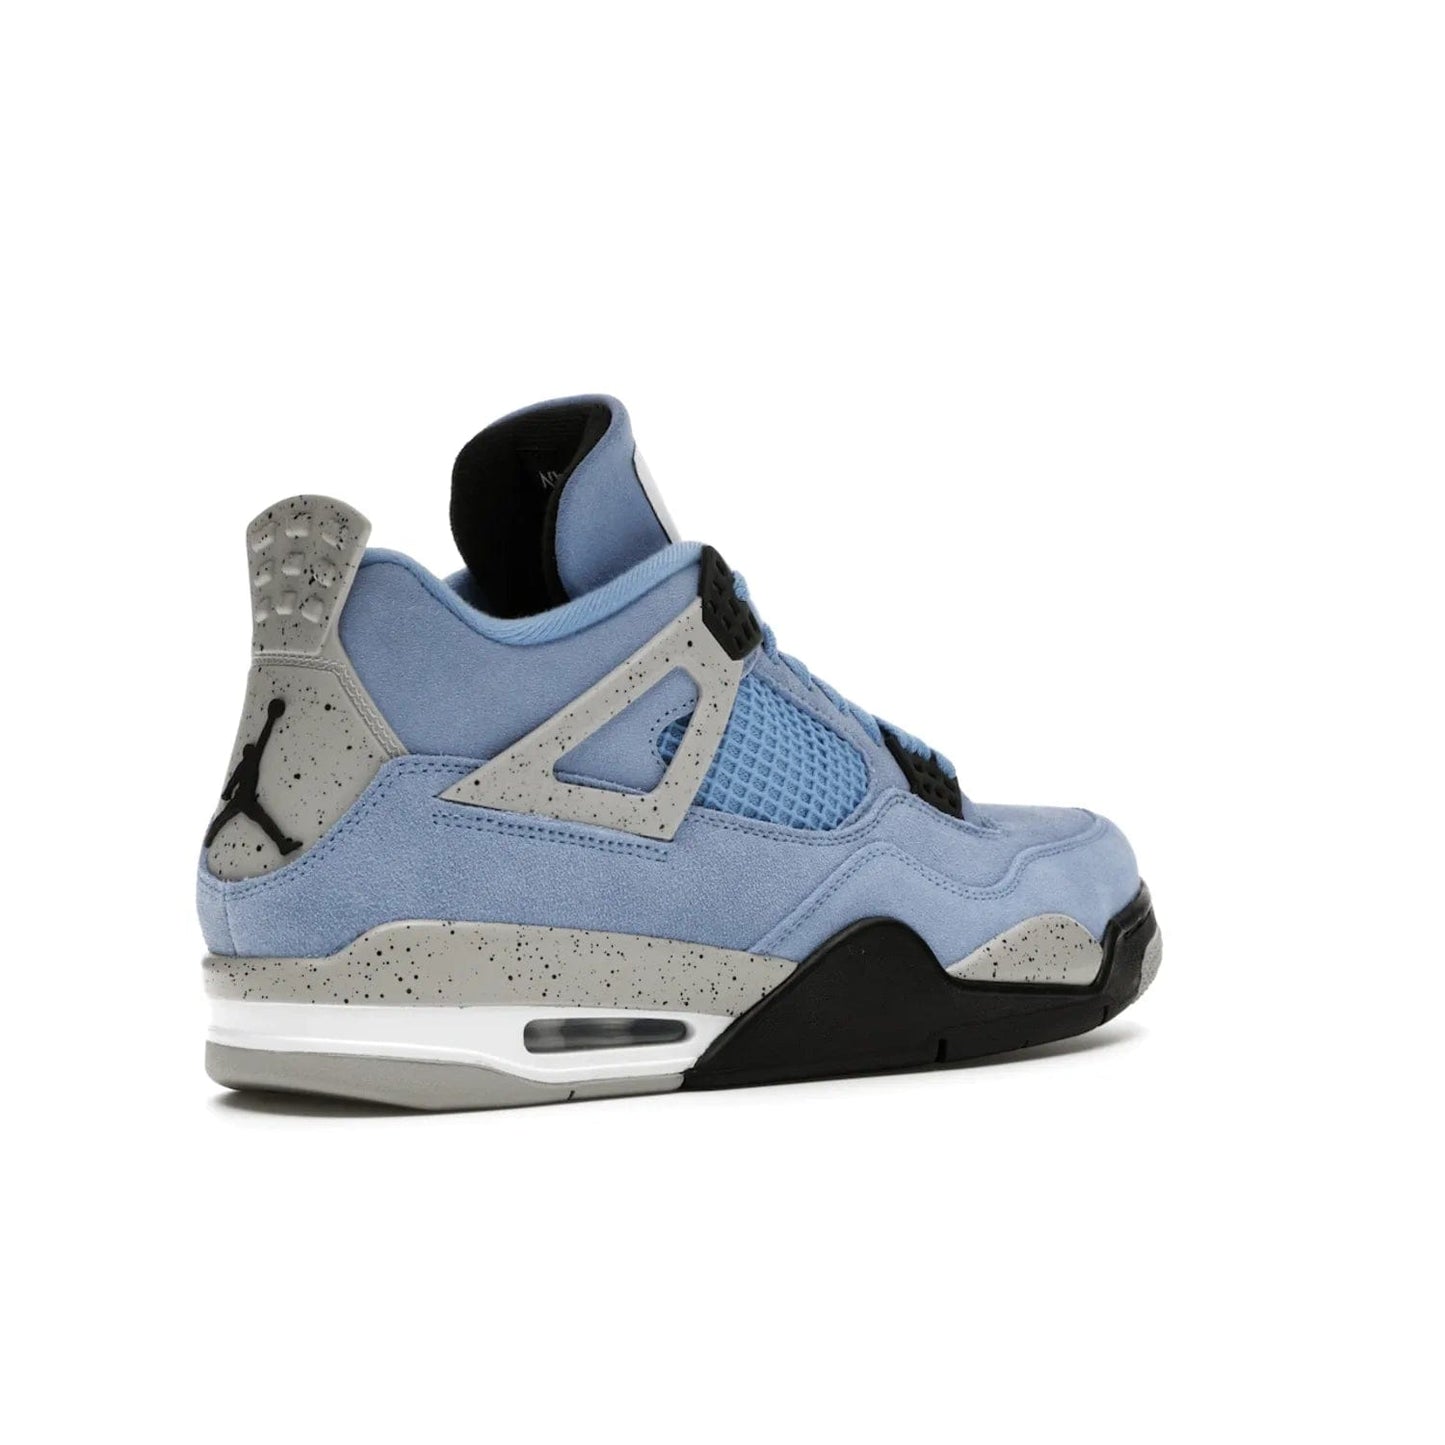 Jordan 4 Retro University Blue - Image 33 - Only at www.BallersClubKickz.com - The Air Jordan 4 University Blue honors MJ's alma mater. Rich University Blue suede, panels of netting, and Cement Grey speckled eyelets give this design an edgy look. Features a black, white and Tech Grey sole with a clear Air unit and two woven labels on the tongue. Jumpman logo & Team Jordan jock tag included. Released April 2021.